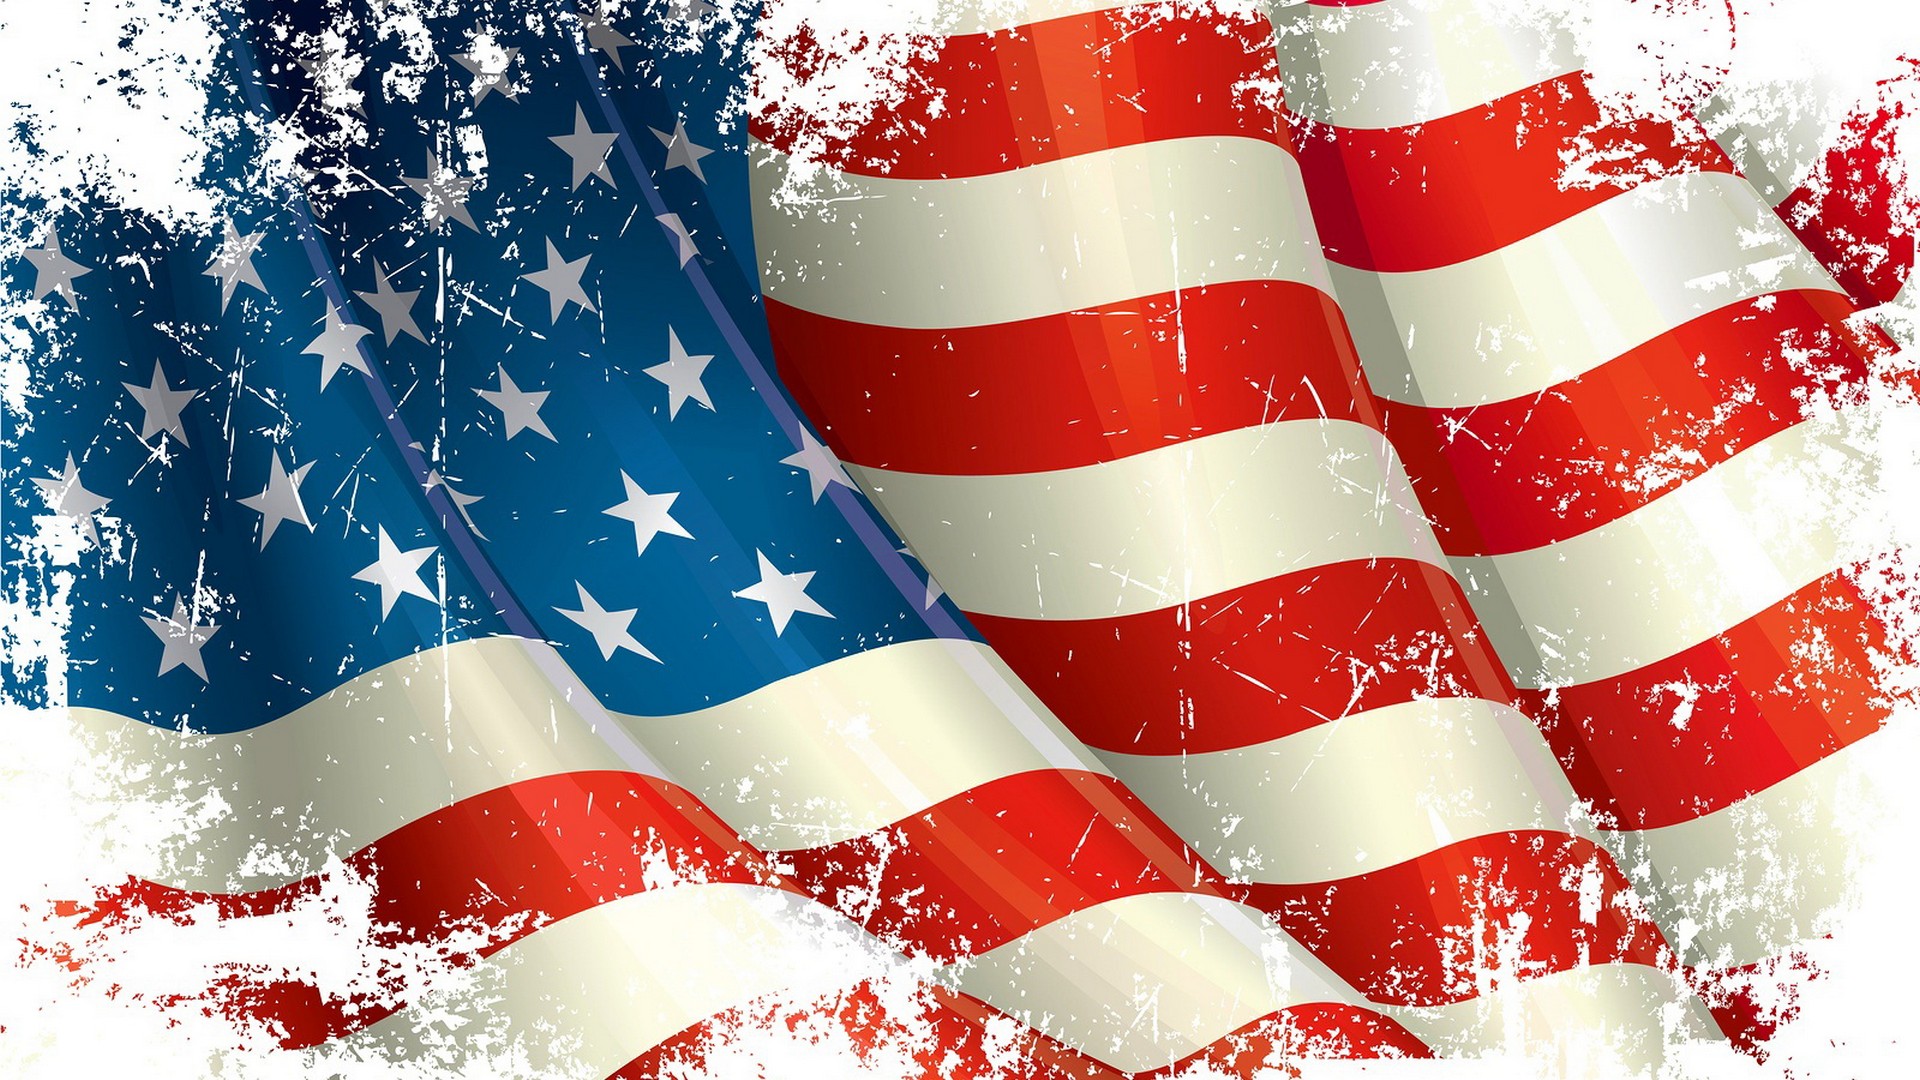 American Flag Wallpaper For Desktop With High-resolution - Grunge American  Flag Background - 1920x1080 Wallpaper 